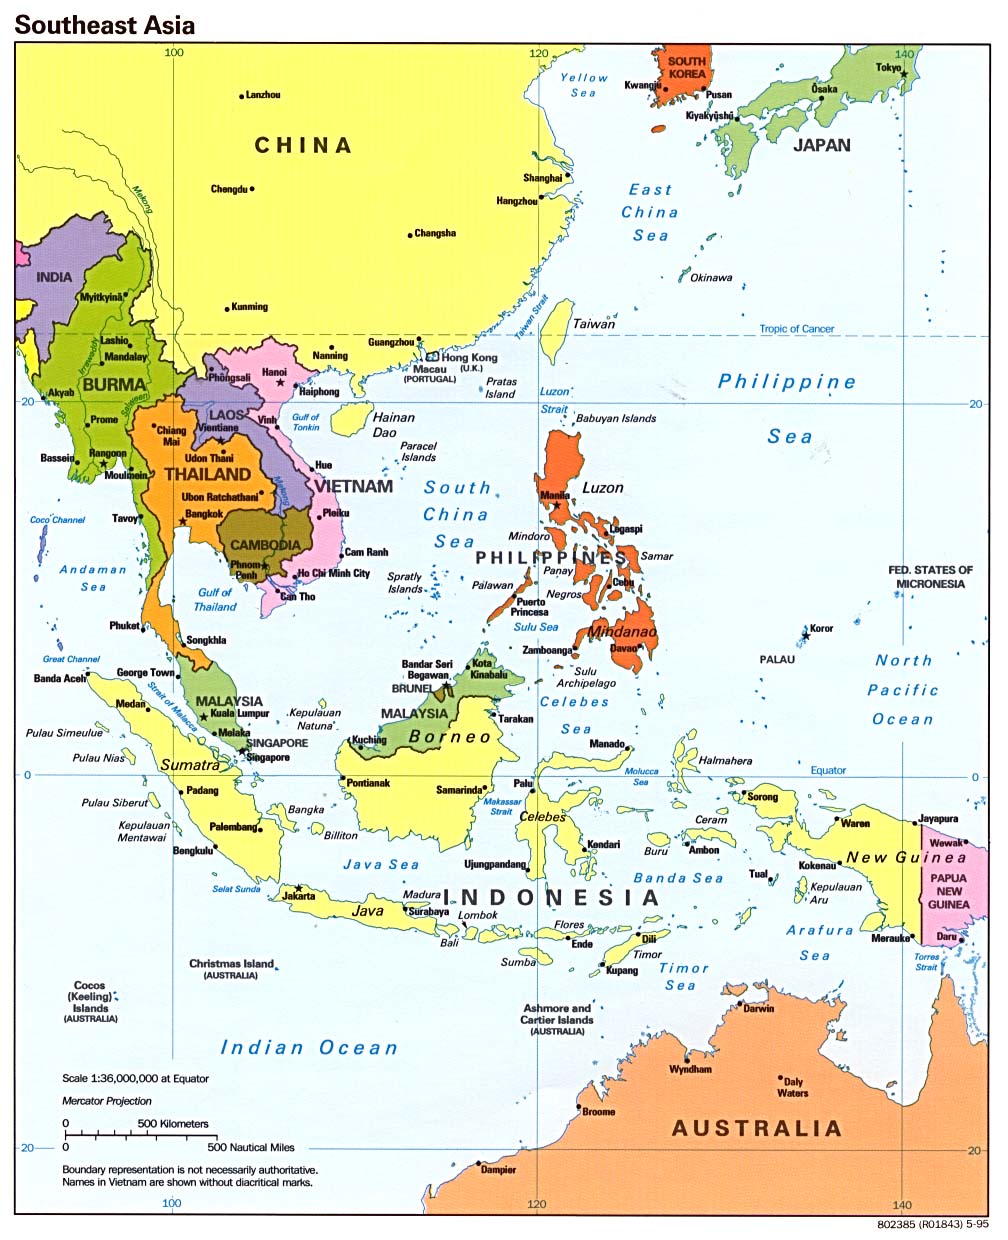 Southeast Asia Political Map 1995 - Full size